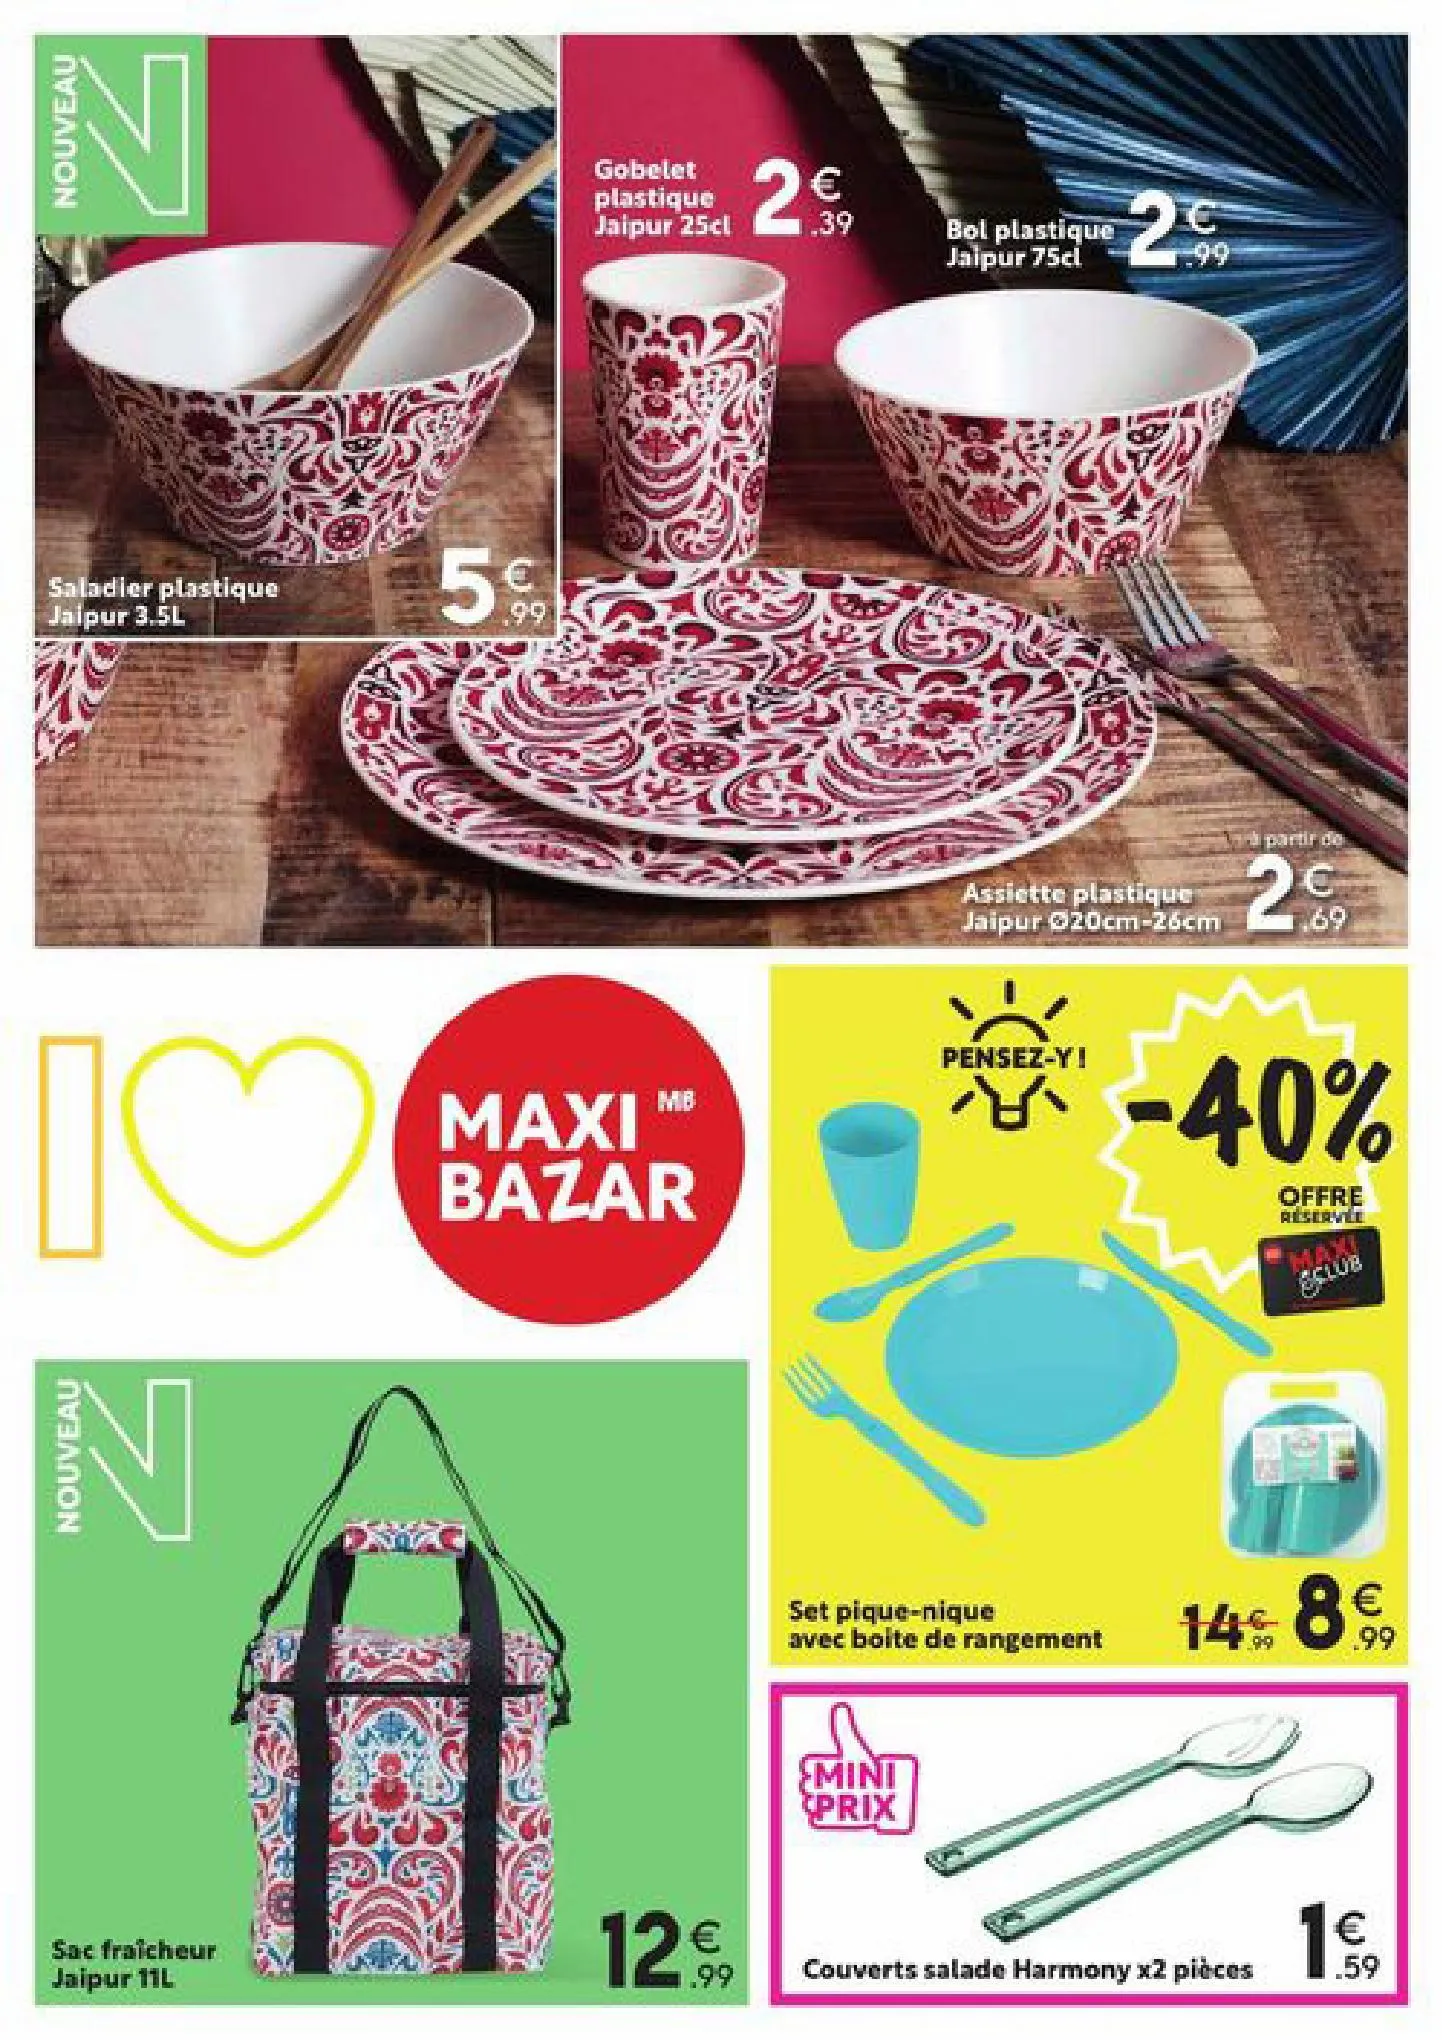 Catalogue DYA Shopping offres, page 00005